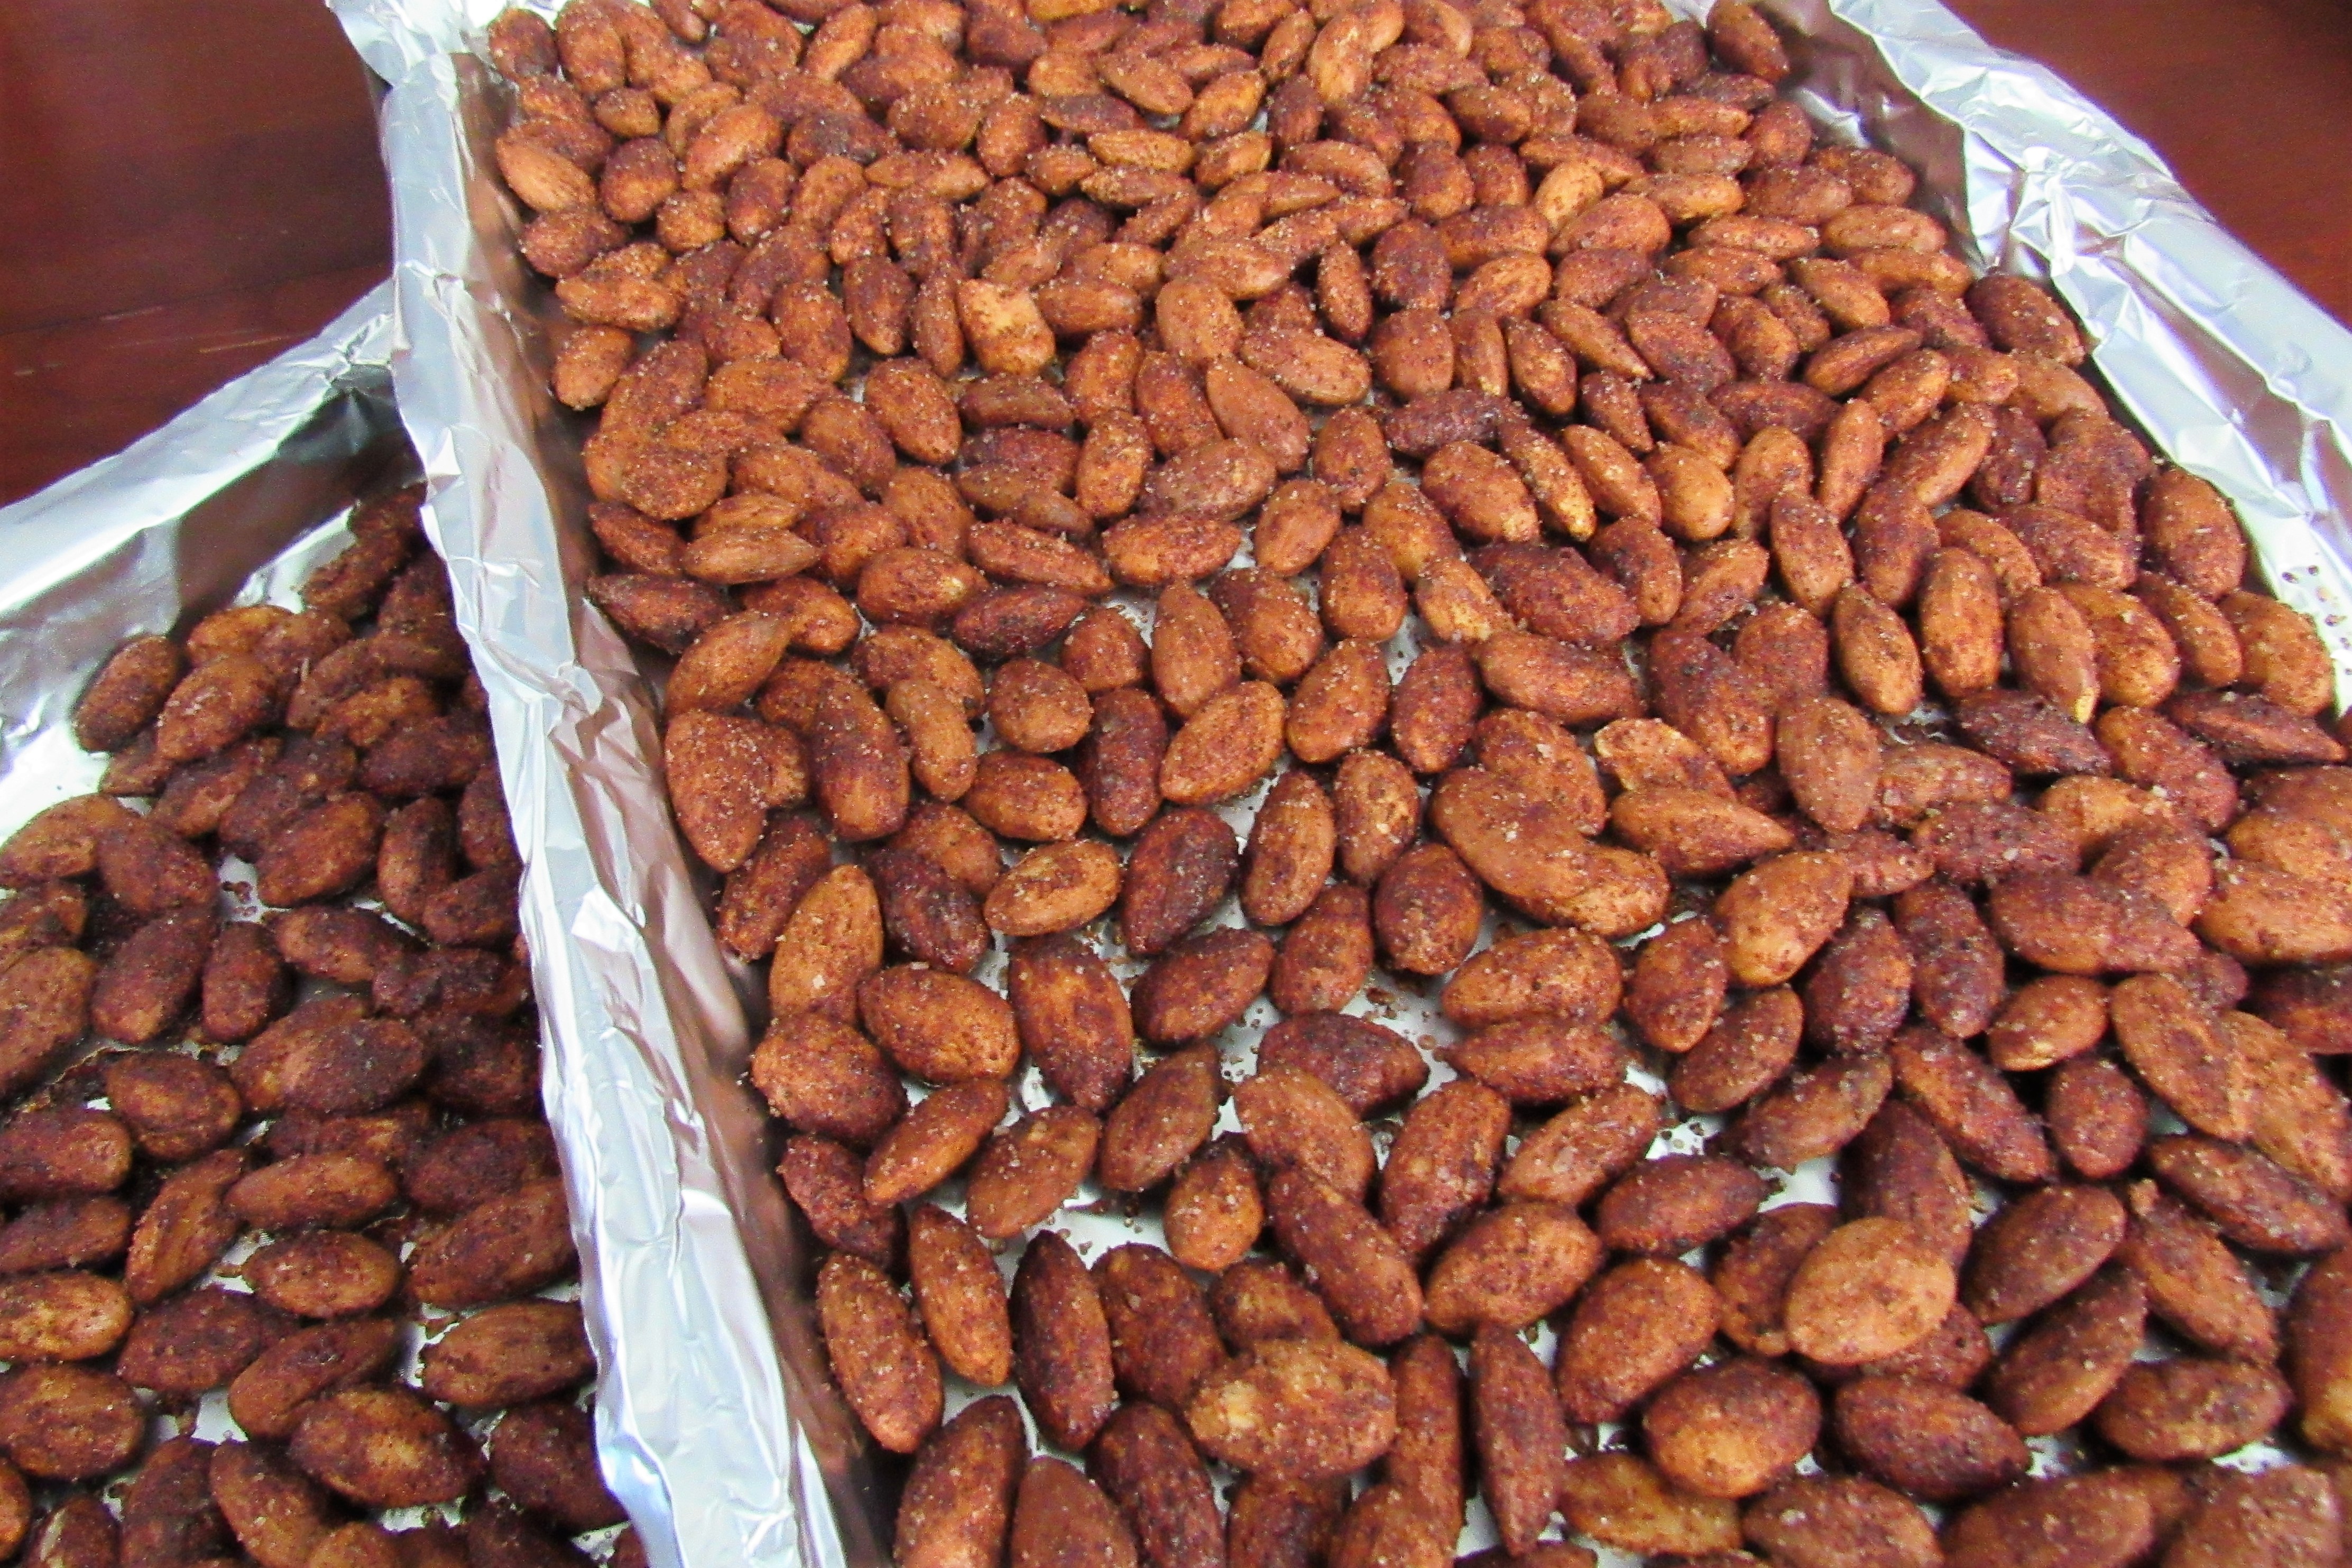 low sugar sweet and spicy roasted almonds